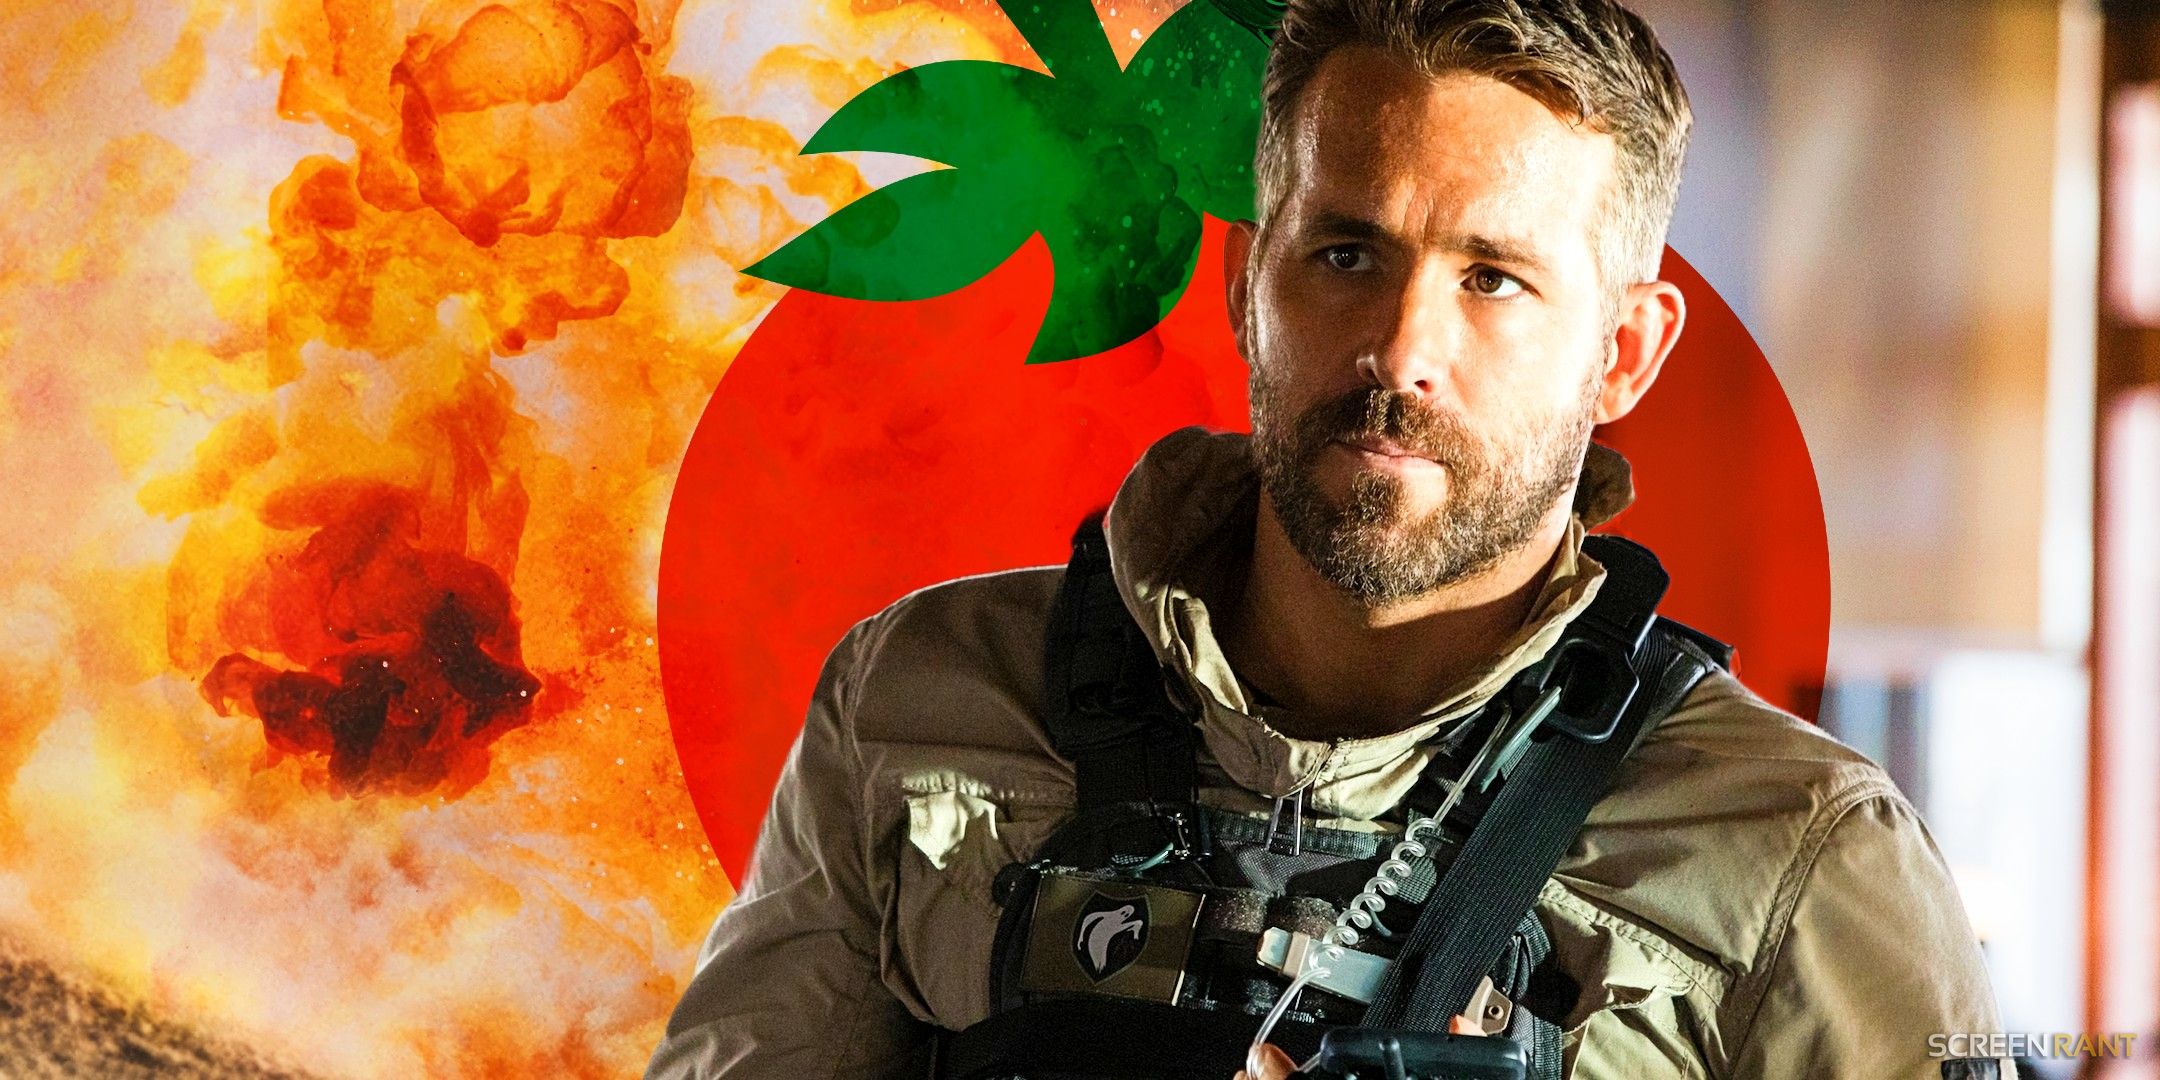 Ryan Reynolds in 6 Underground with Rotten Tomatoes logo and explosion from The Fall Guy